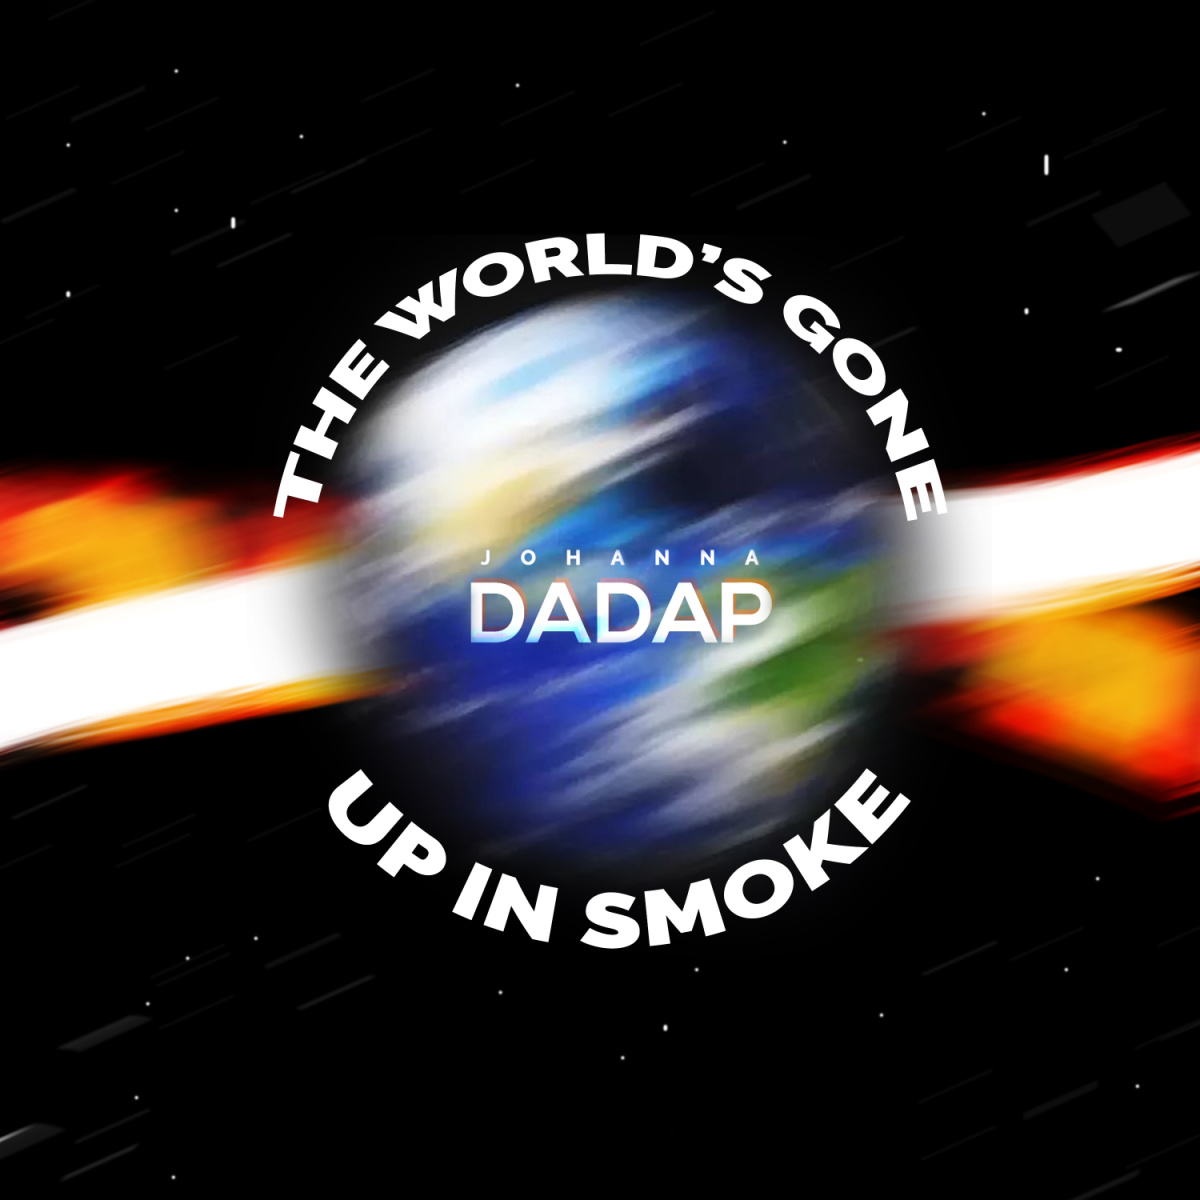 Johanna Dadap - "The World’s Gone Up In Smoke" Review | Opinions | LIVING LIFE FEARLESS